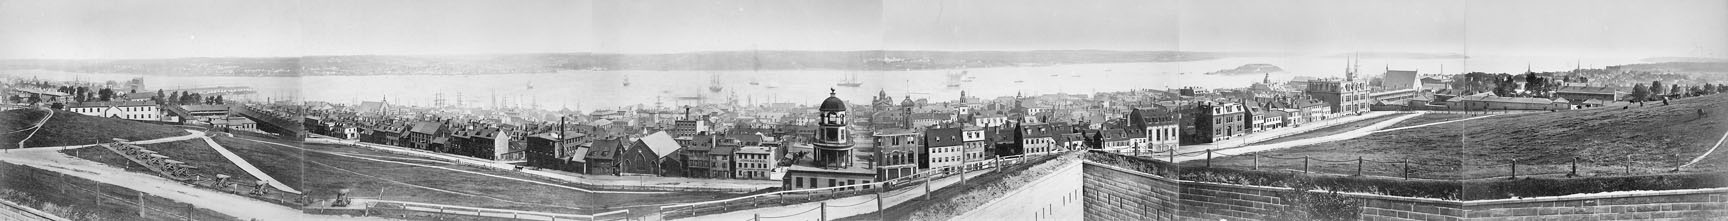 Panorama View of Halifax from the Citadel, showing the Harbour and the Dartmouth Shore, 1892-93